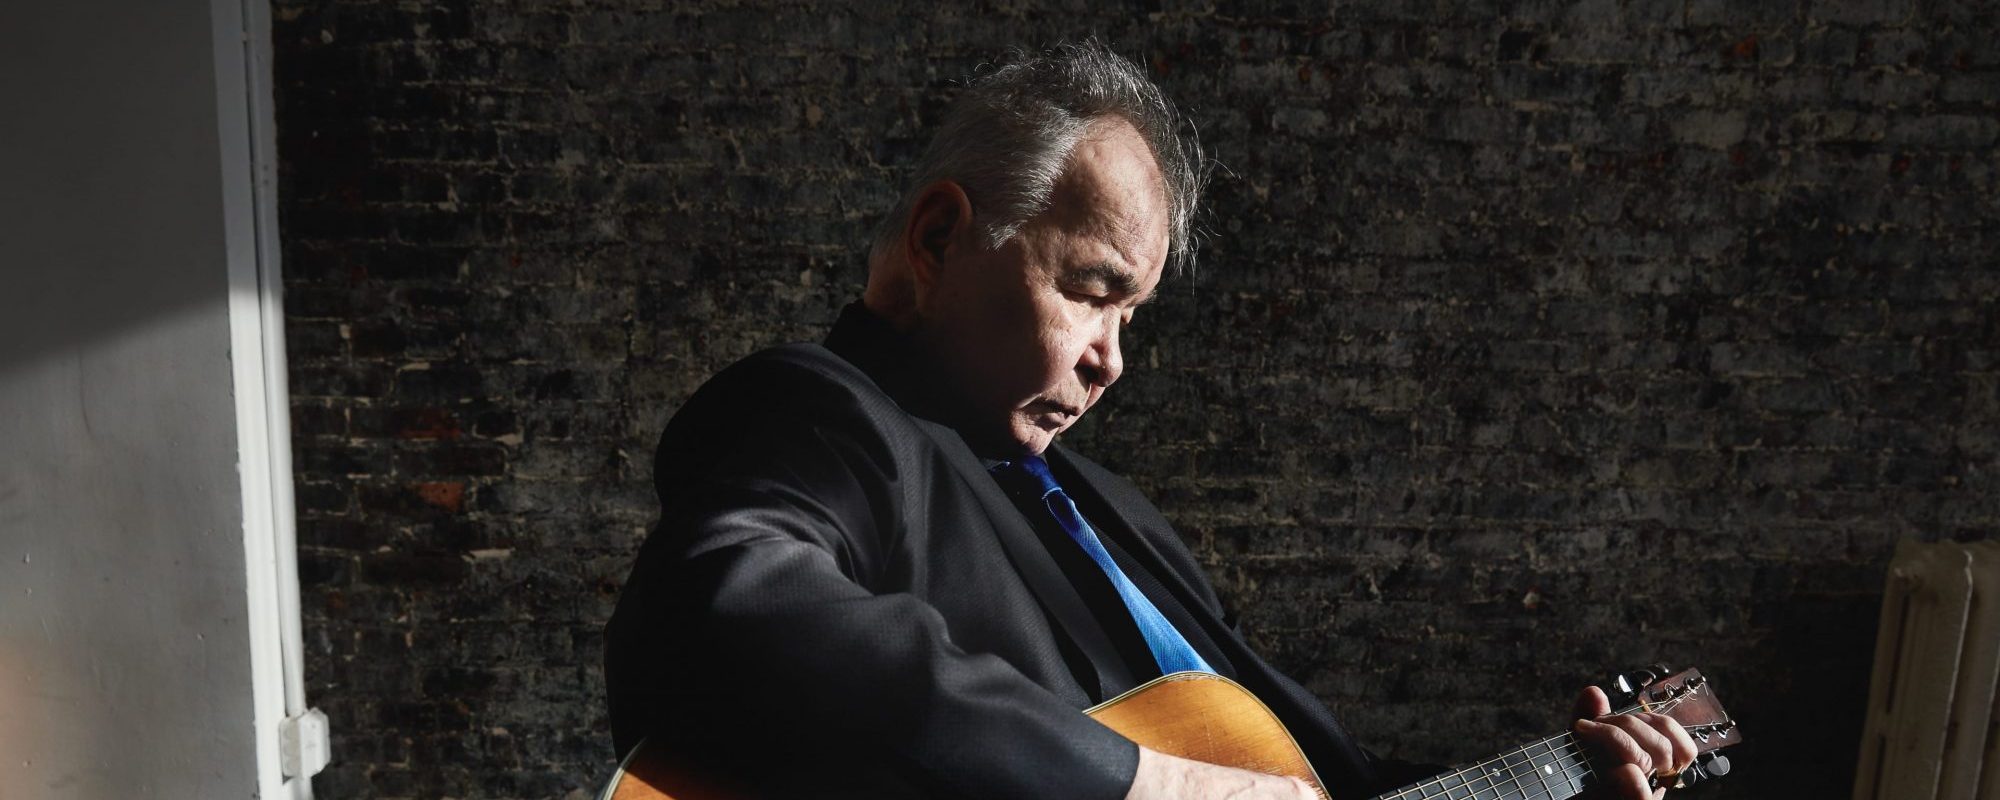 Americana Music Awards: John Prine Honored With ‘Song Of The Year’  for His Posthumous Release “I Remember Everything”